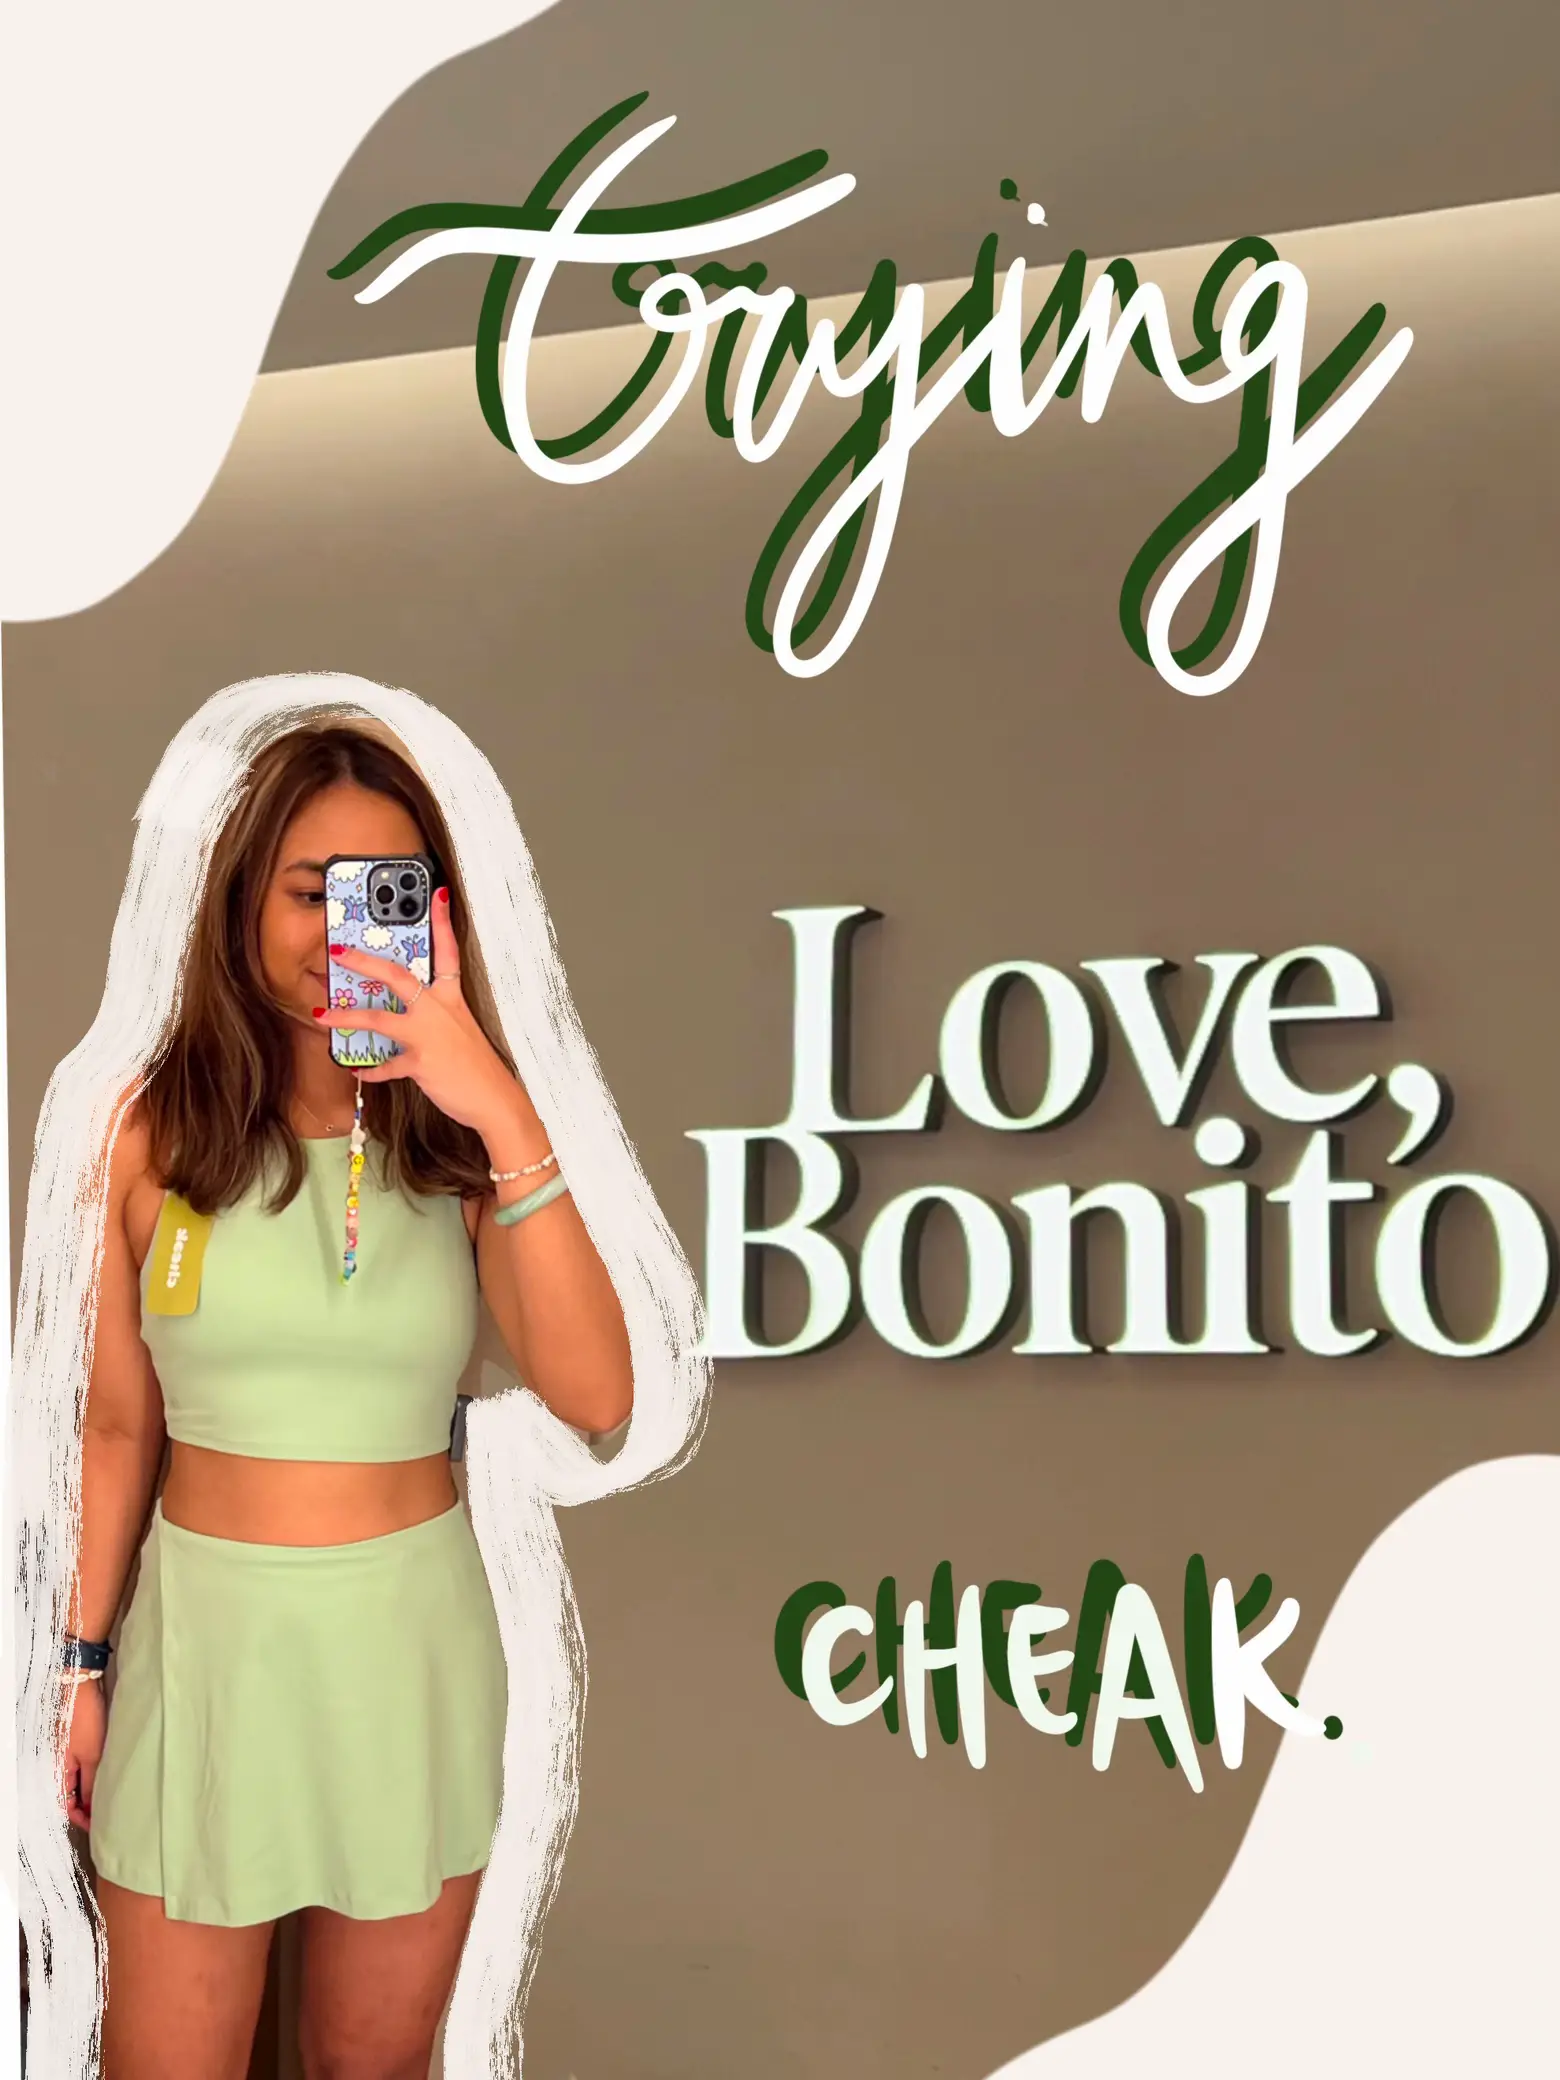 trying cheak activewear by Love, Bonito! | Gallery posted by